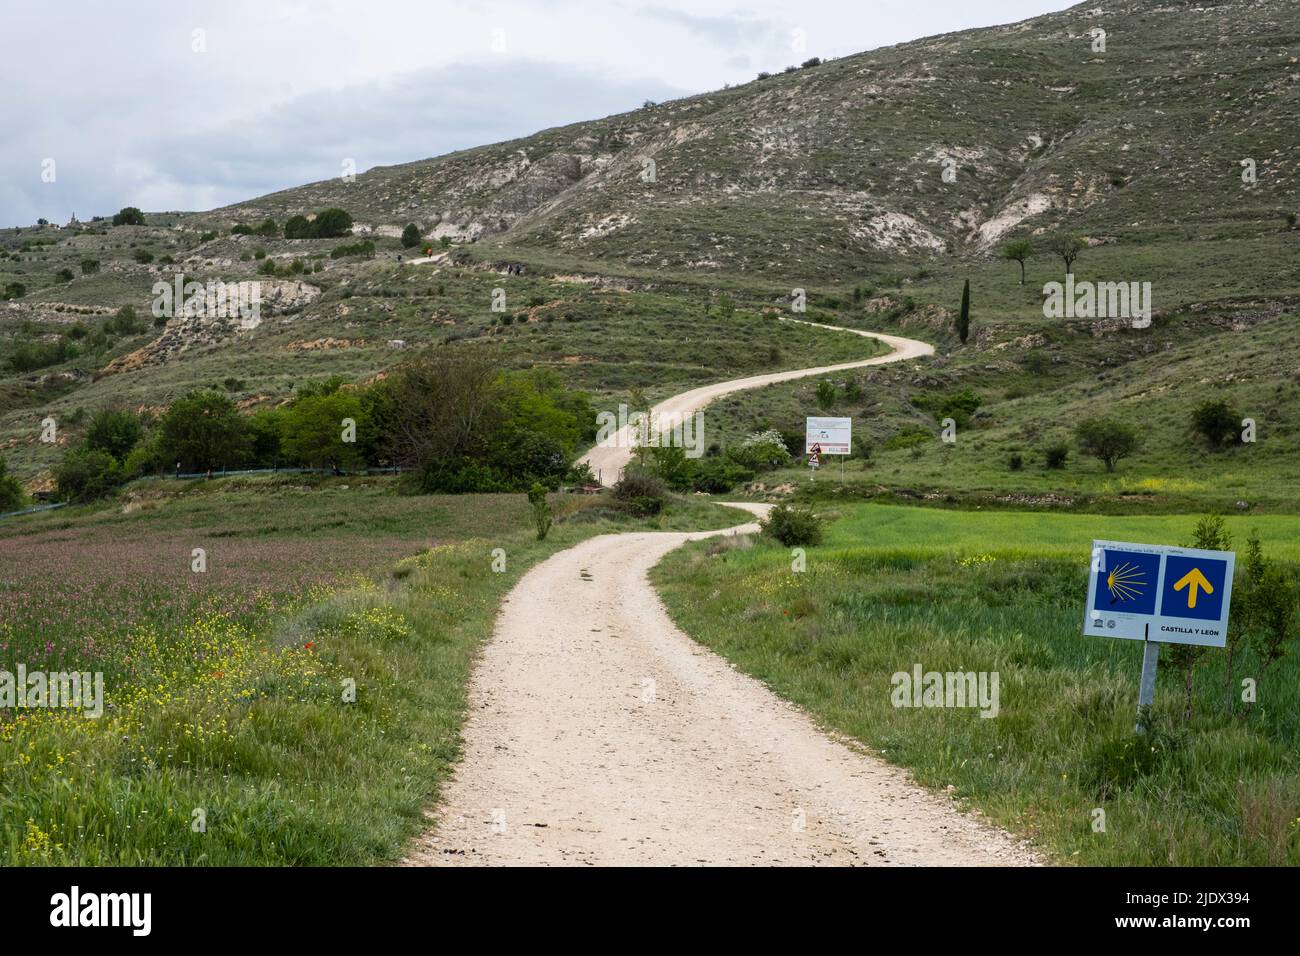 Spain, Leaving Castrojeriz en route to Fromista on the Camino de Santiago.. The Camino leads up the hill in the distance. Stock Photo